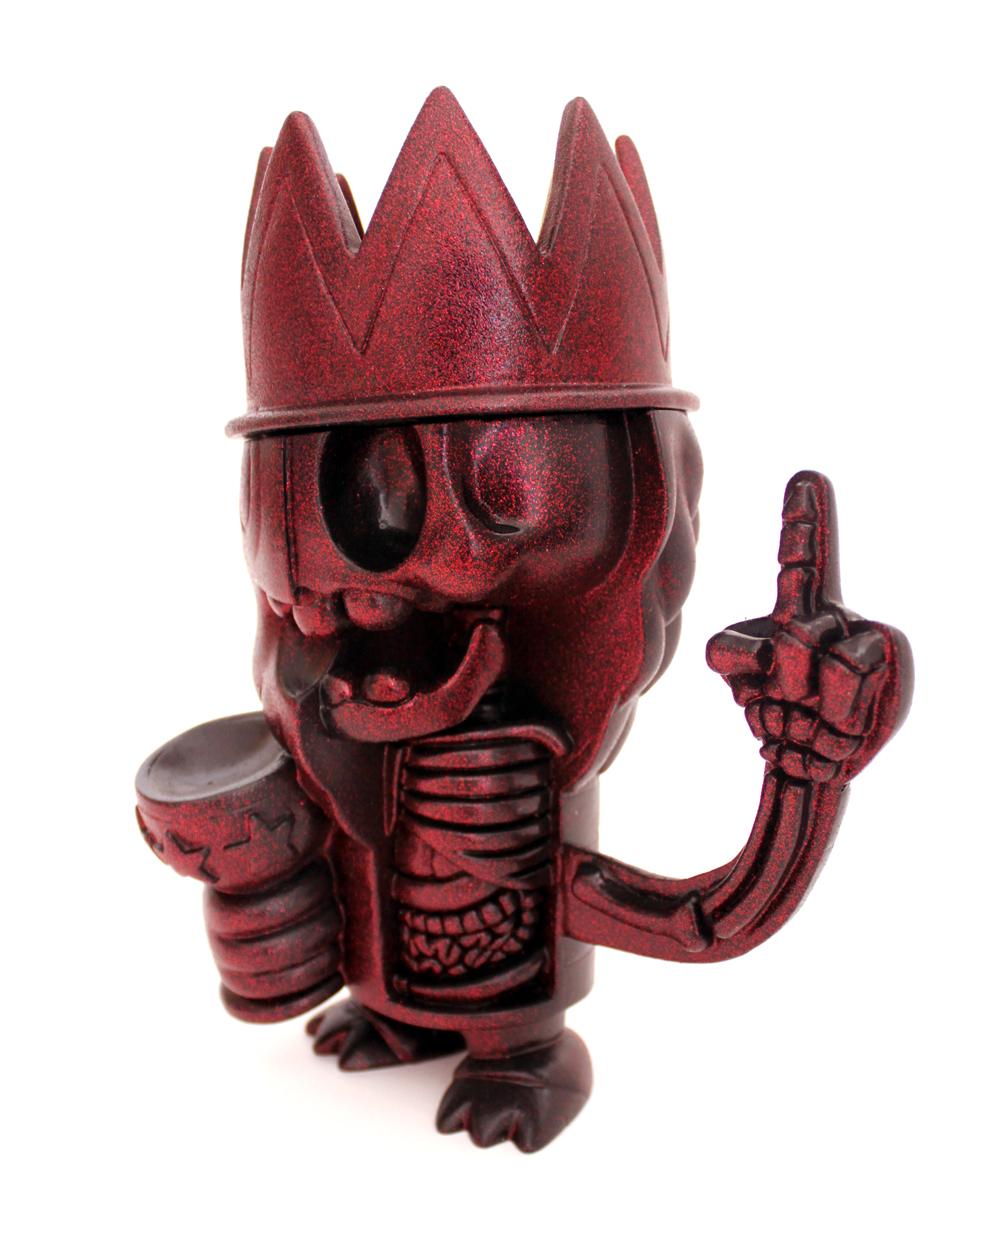 Dissected Toy Prince (Ruby Dust Edition) - Jason Freeny x Pete Fowler x Clutter side